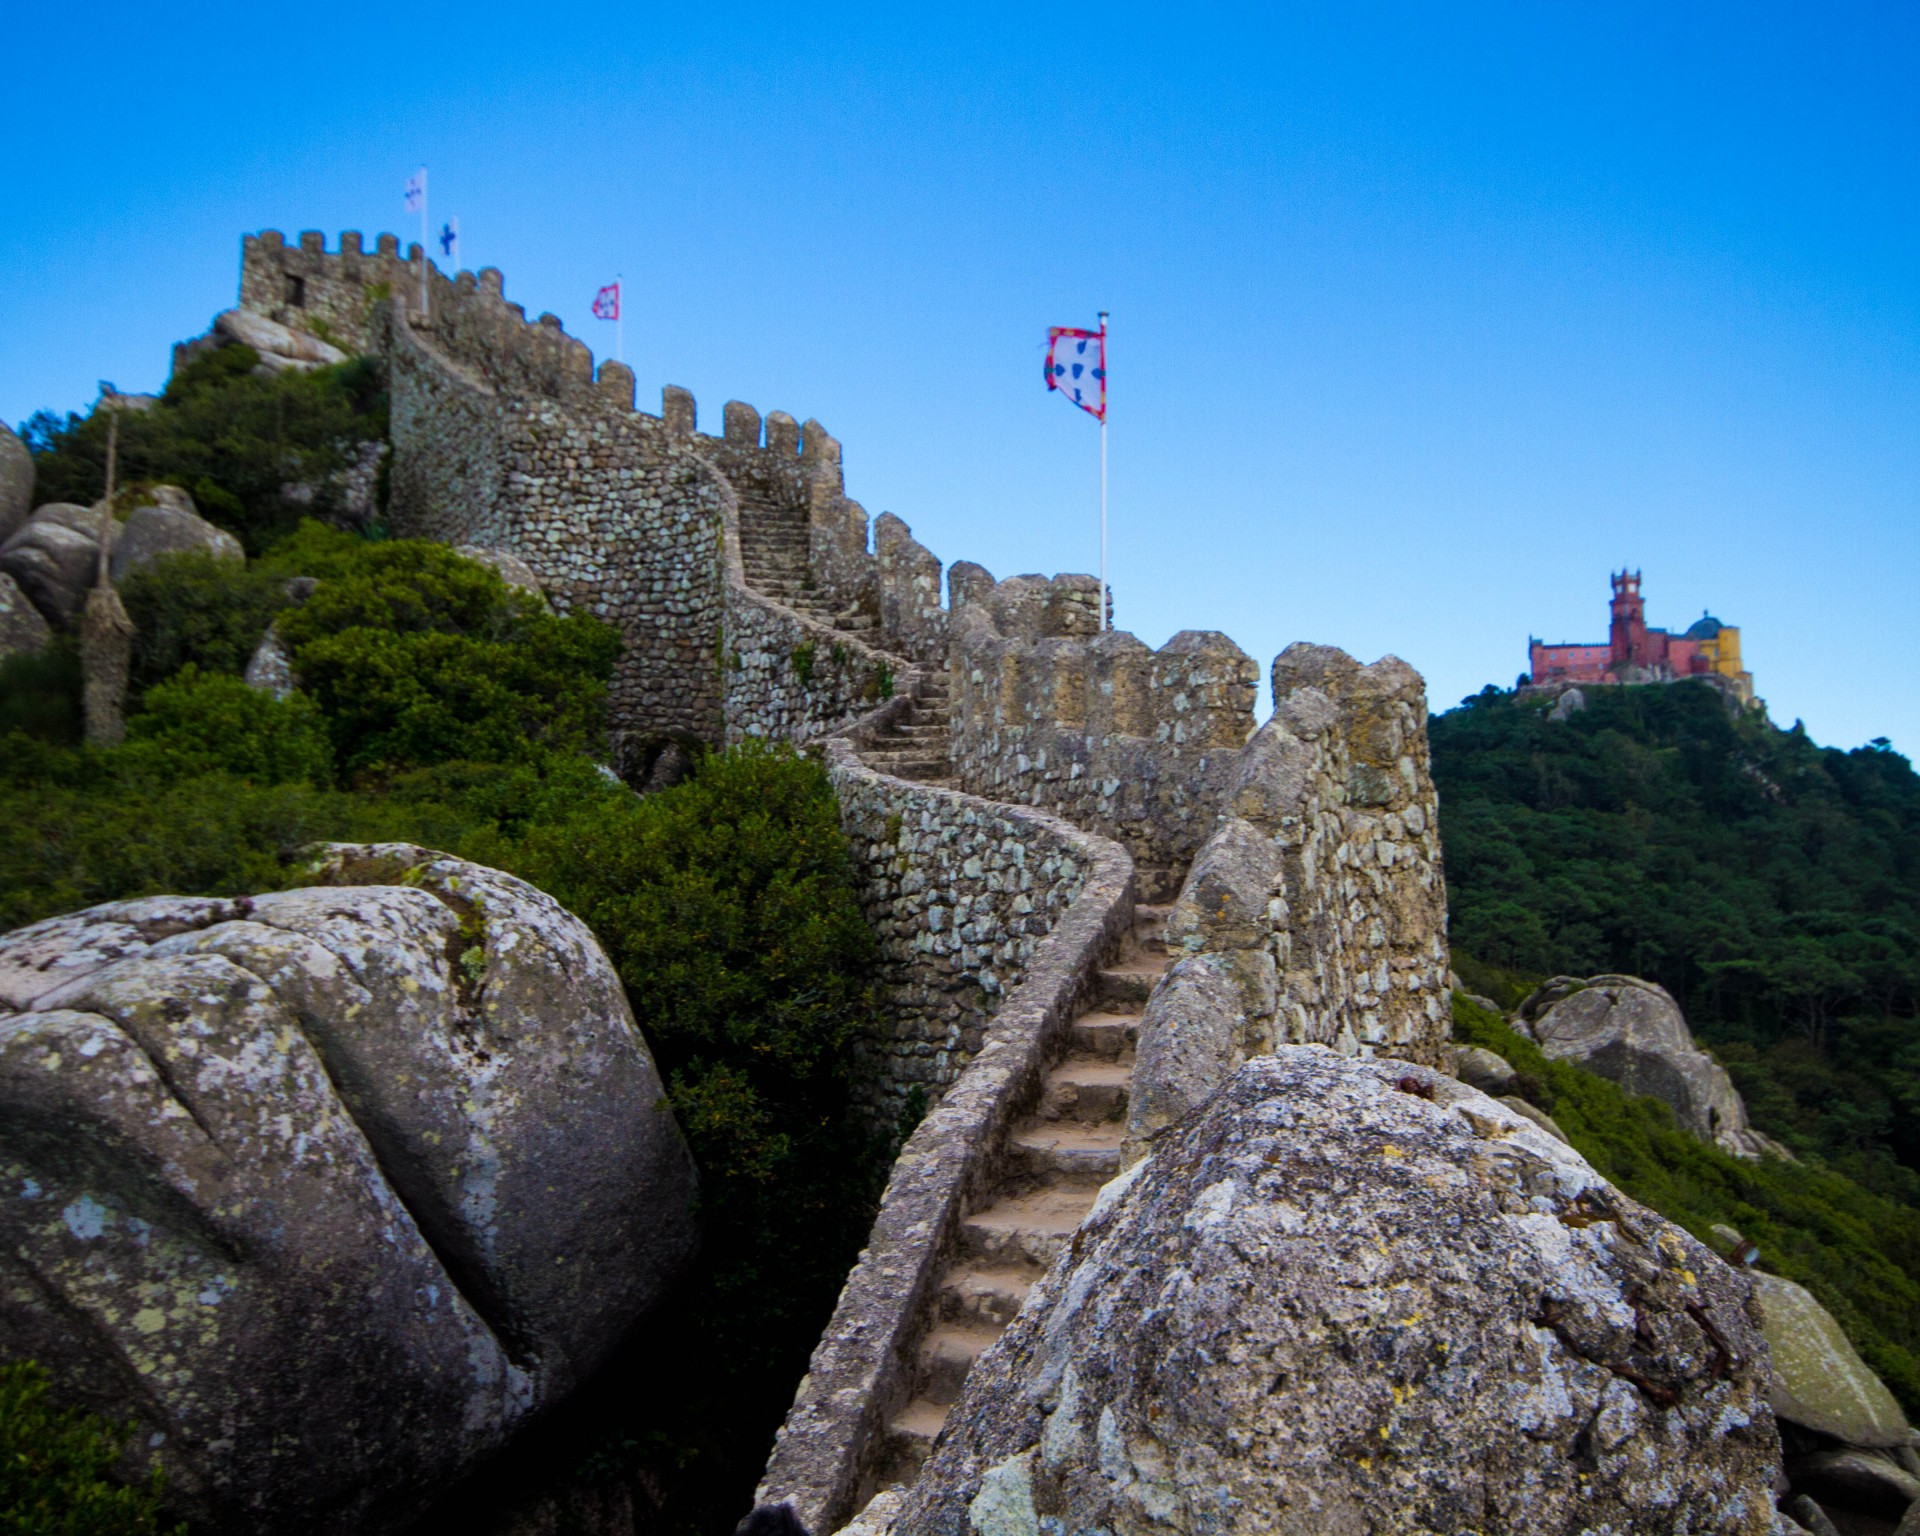 Looking along the wall of a stone castle with a colourful palace in the background - Sintra, Portugal